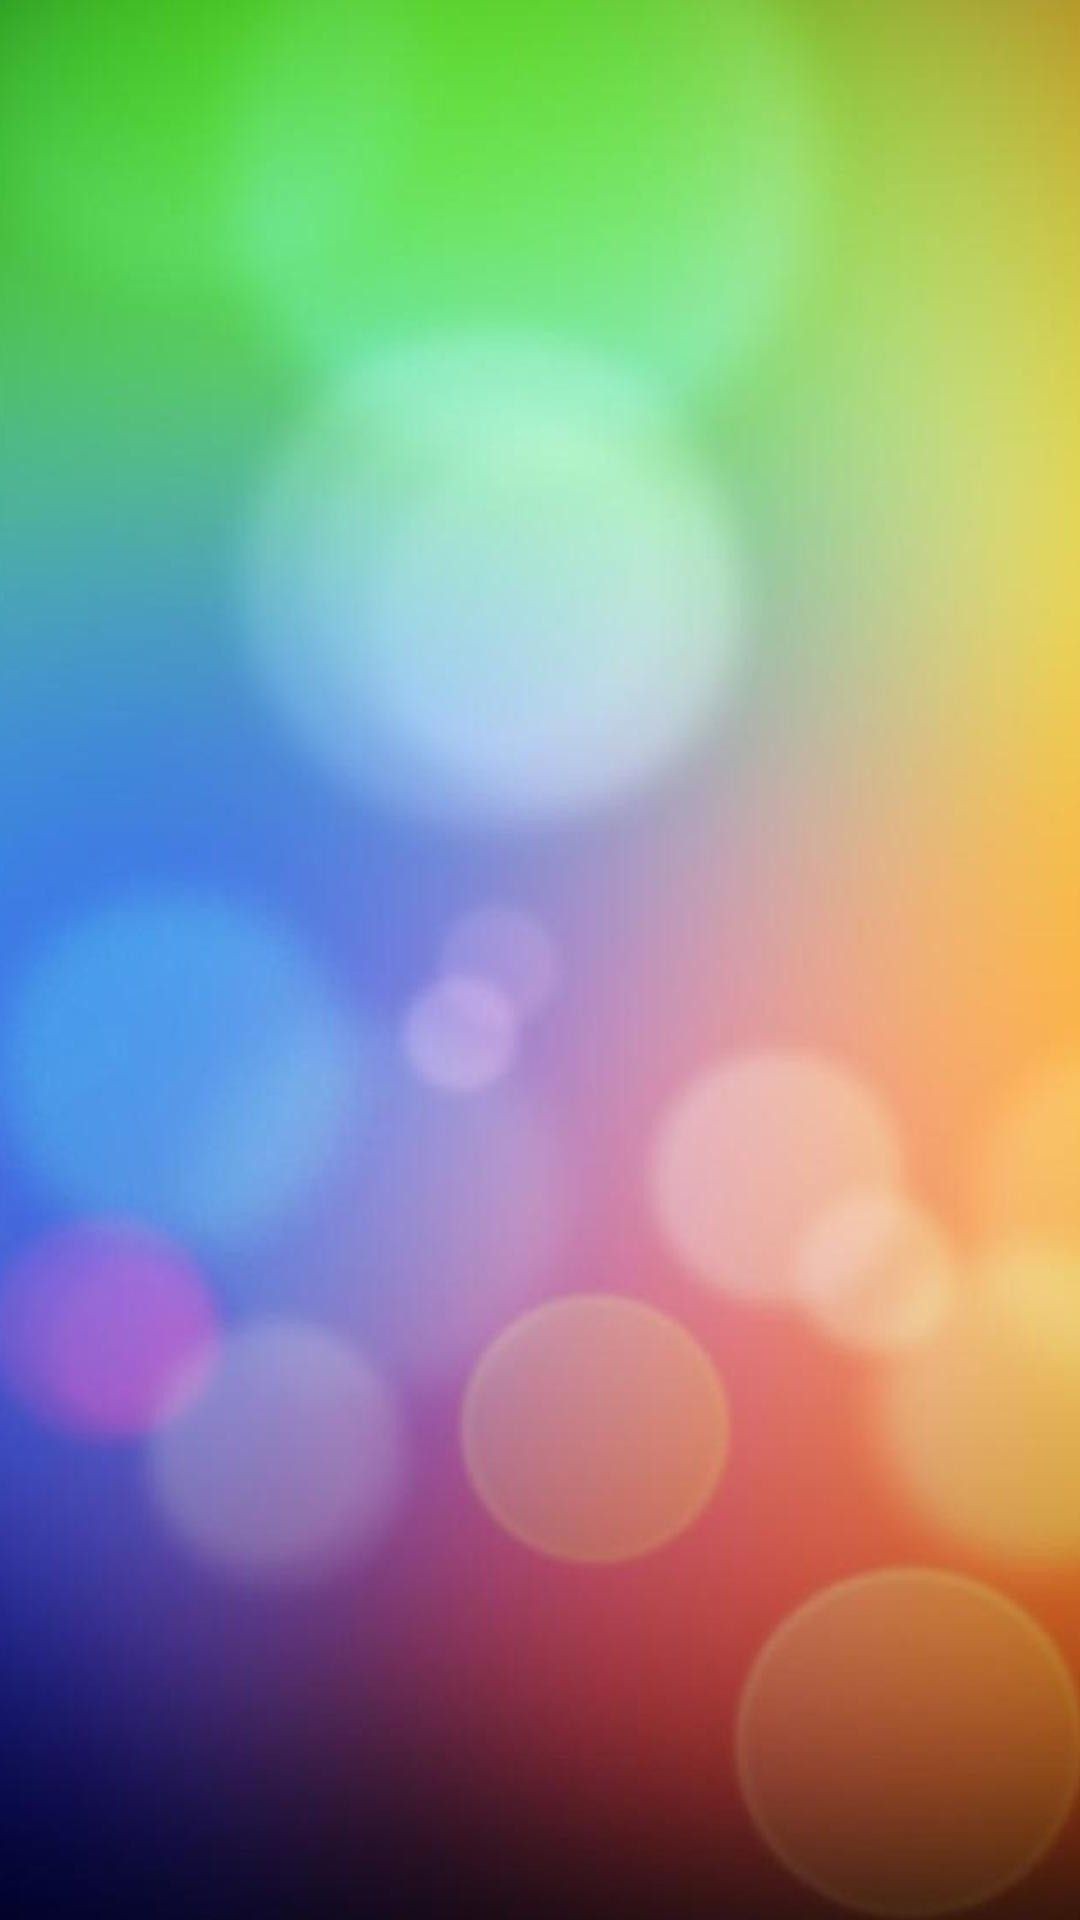 Free download screensaver for android mobile